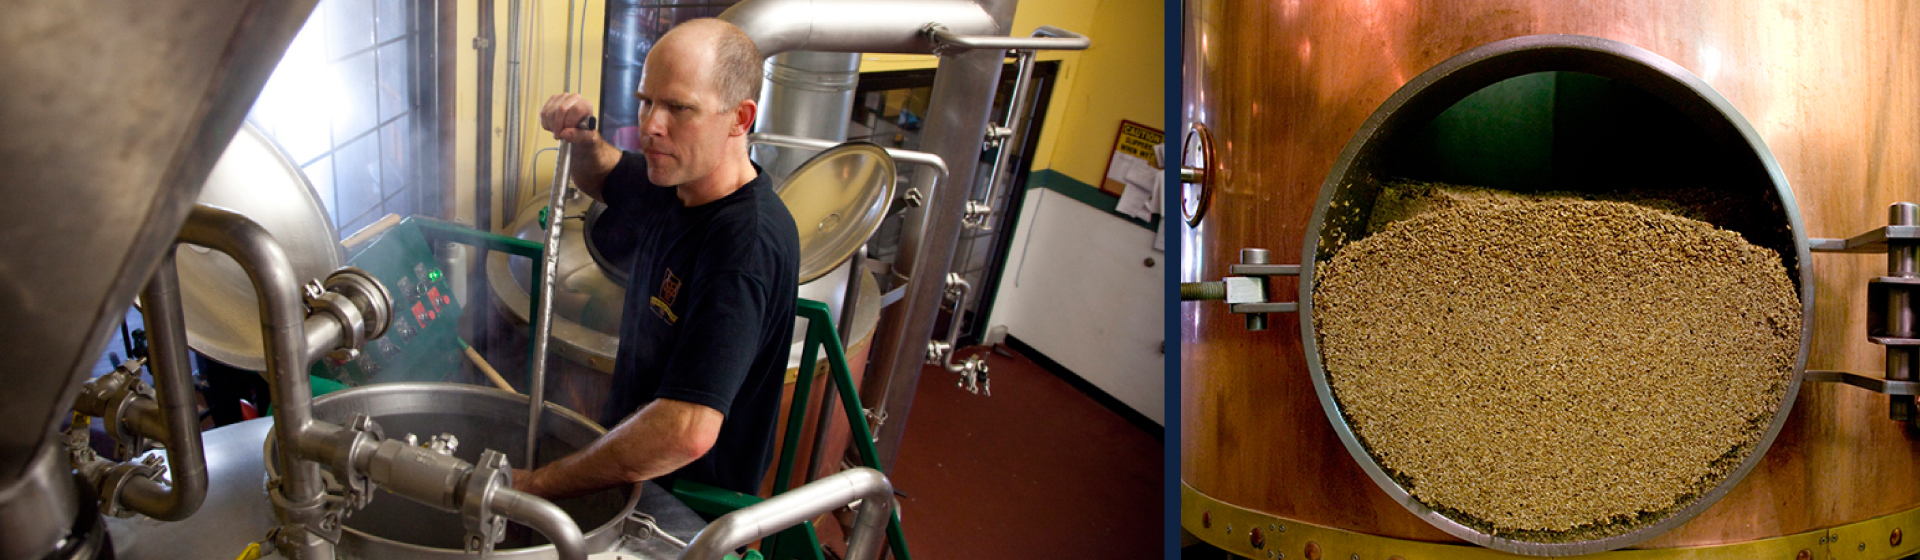 Jesse Shue, Golden Valley Brewery Brewmaster